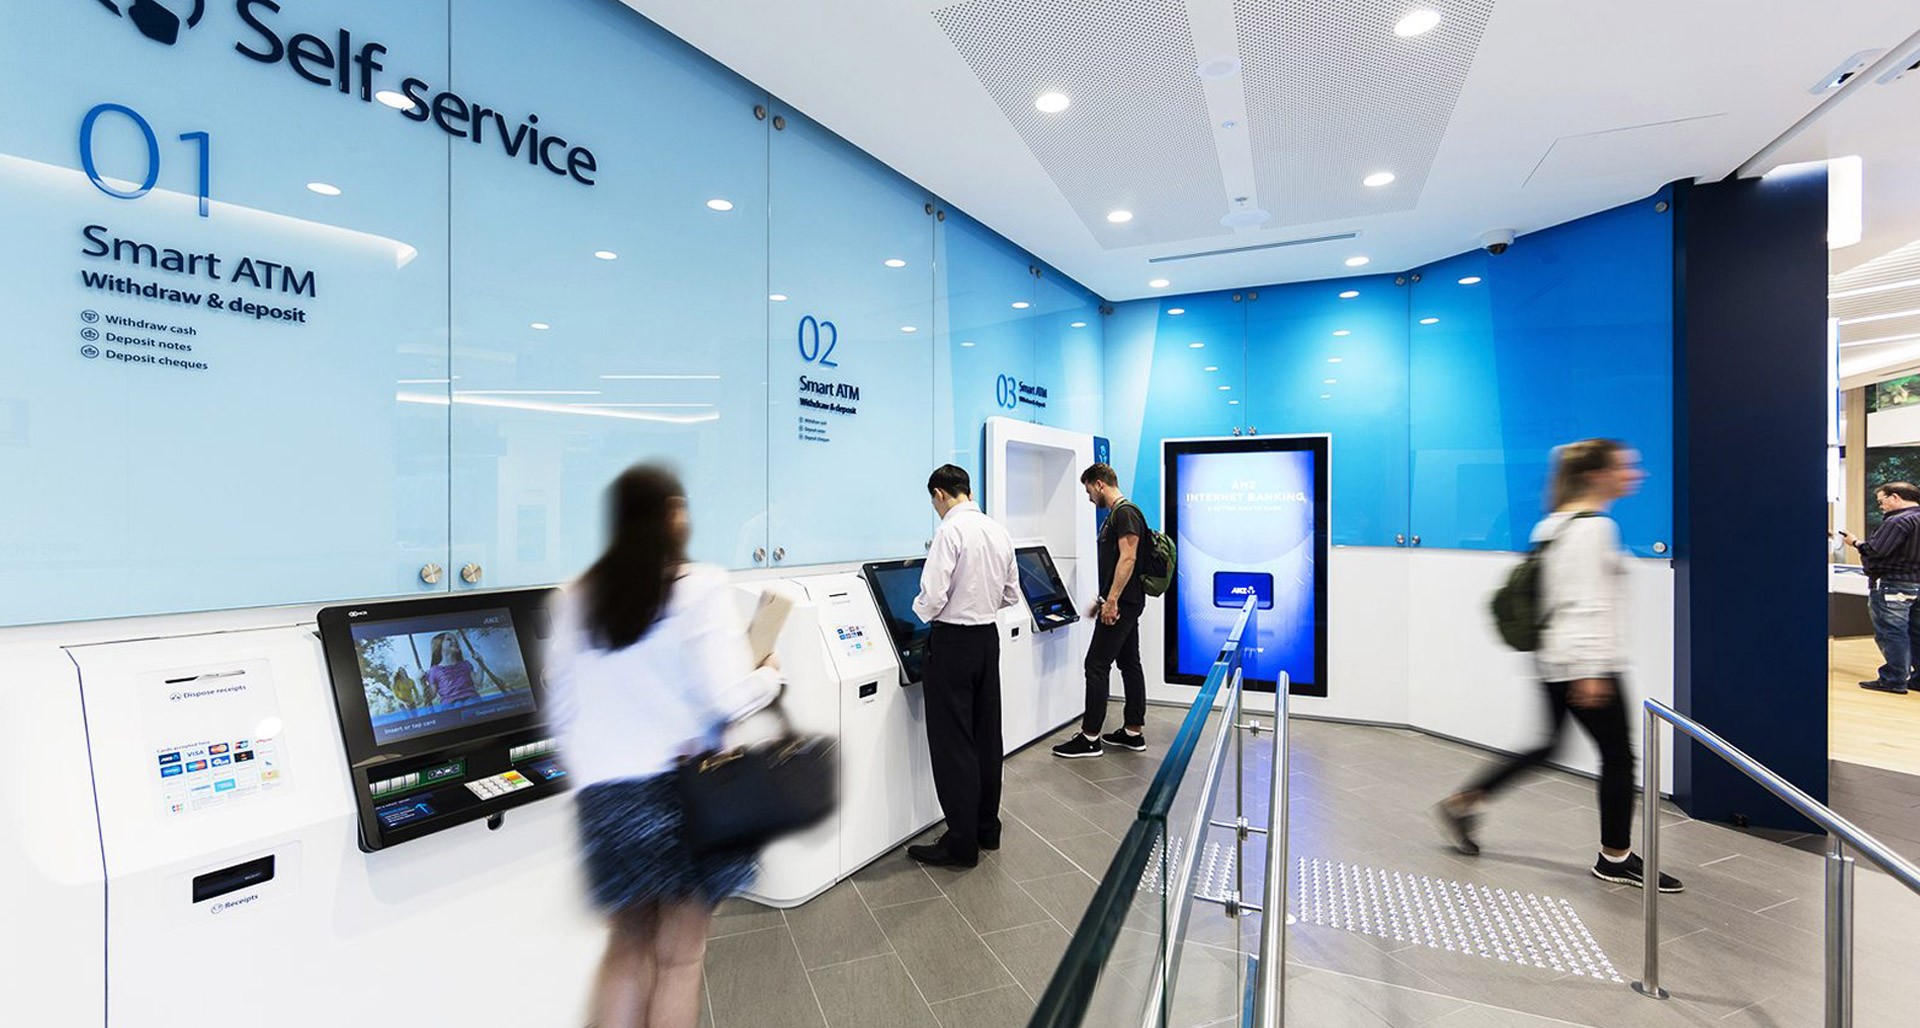 New design ideas and concepts for bank branches. Innovation and the digital entrants.